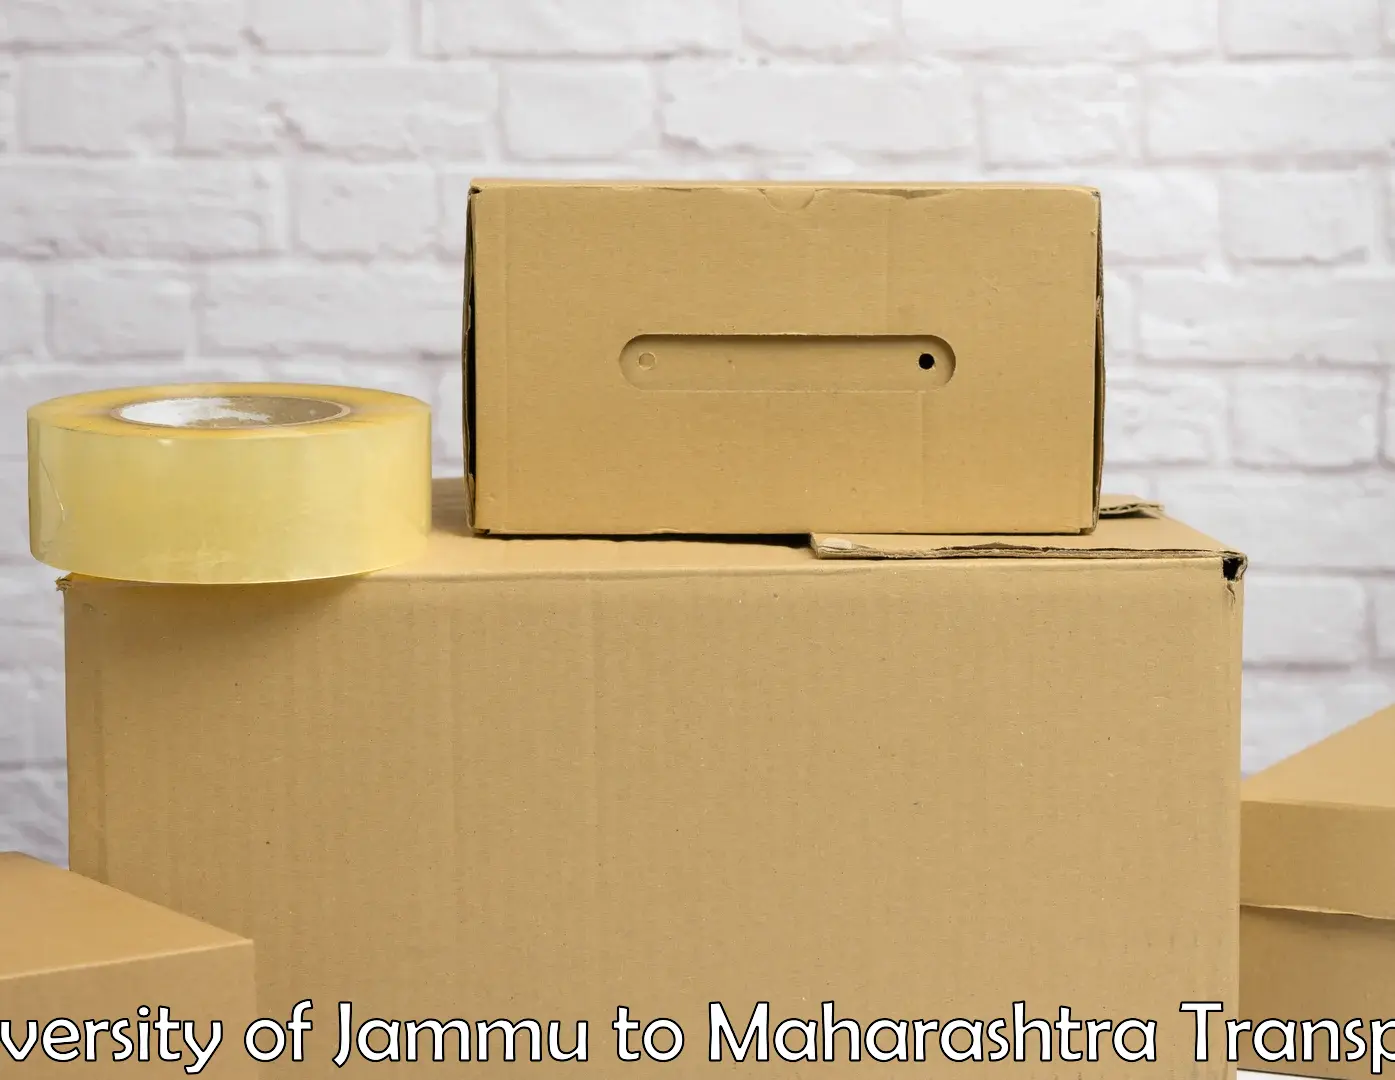 Vehicle courier services University of Jammu to Greater Thane